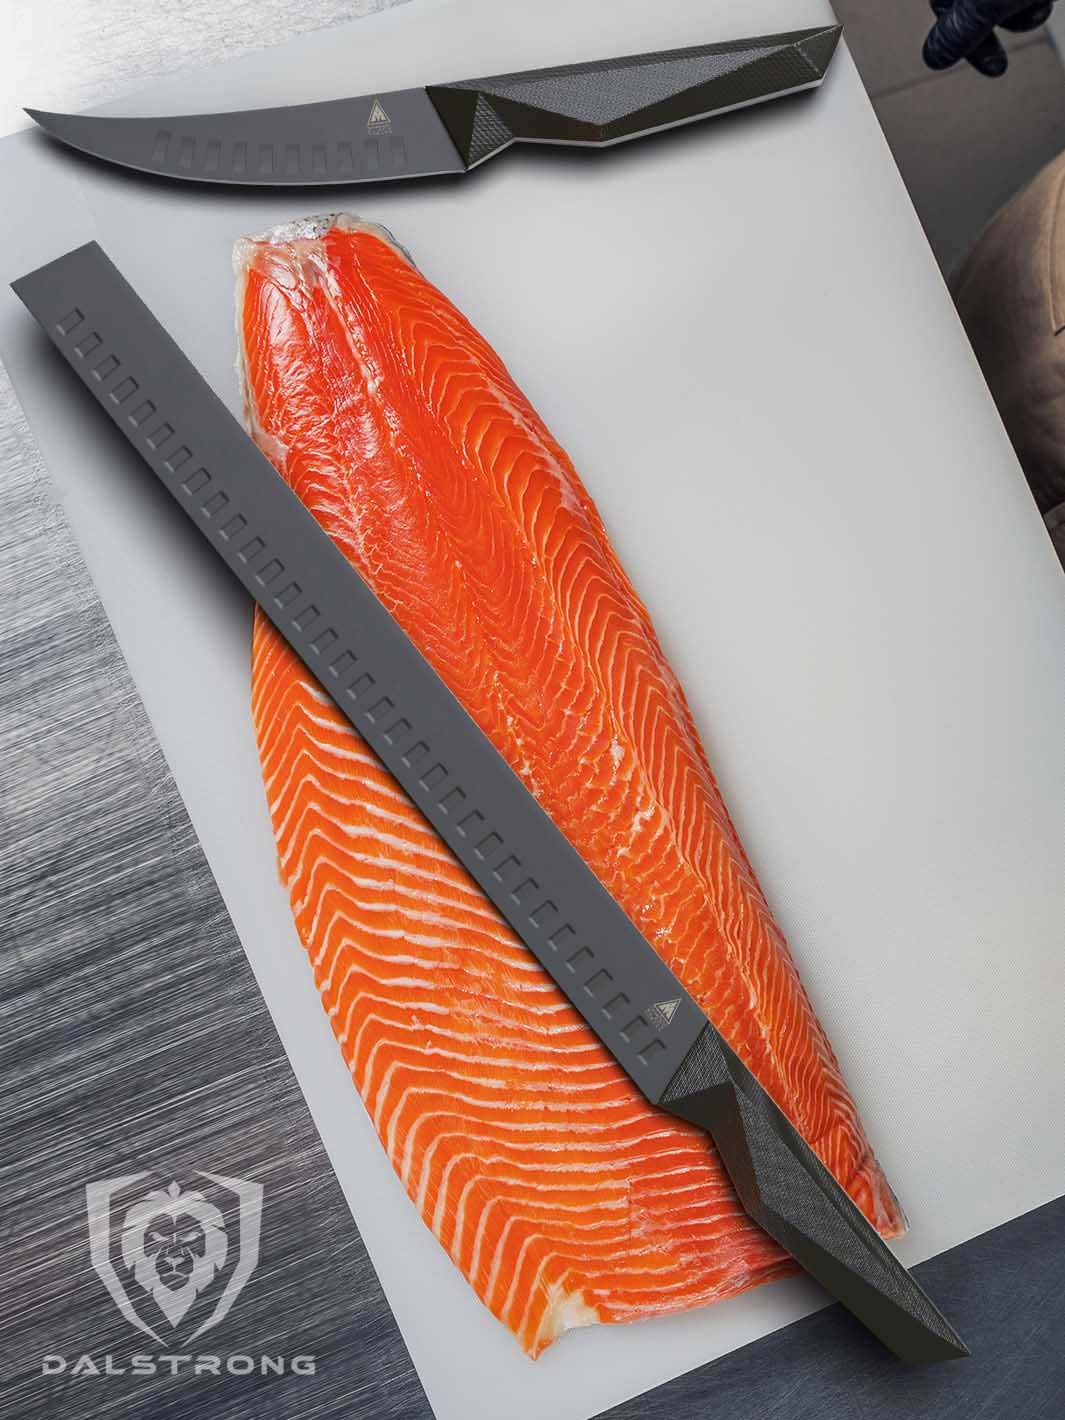 Dalstrong shadow black series 14 inch slicer knife with a fillet of salmon on a white board.